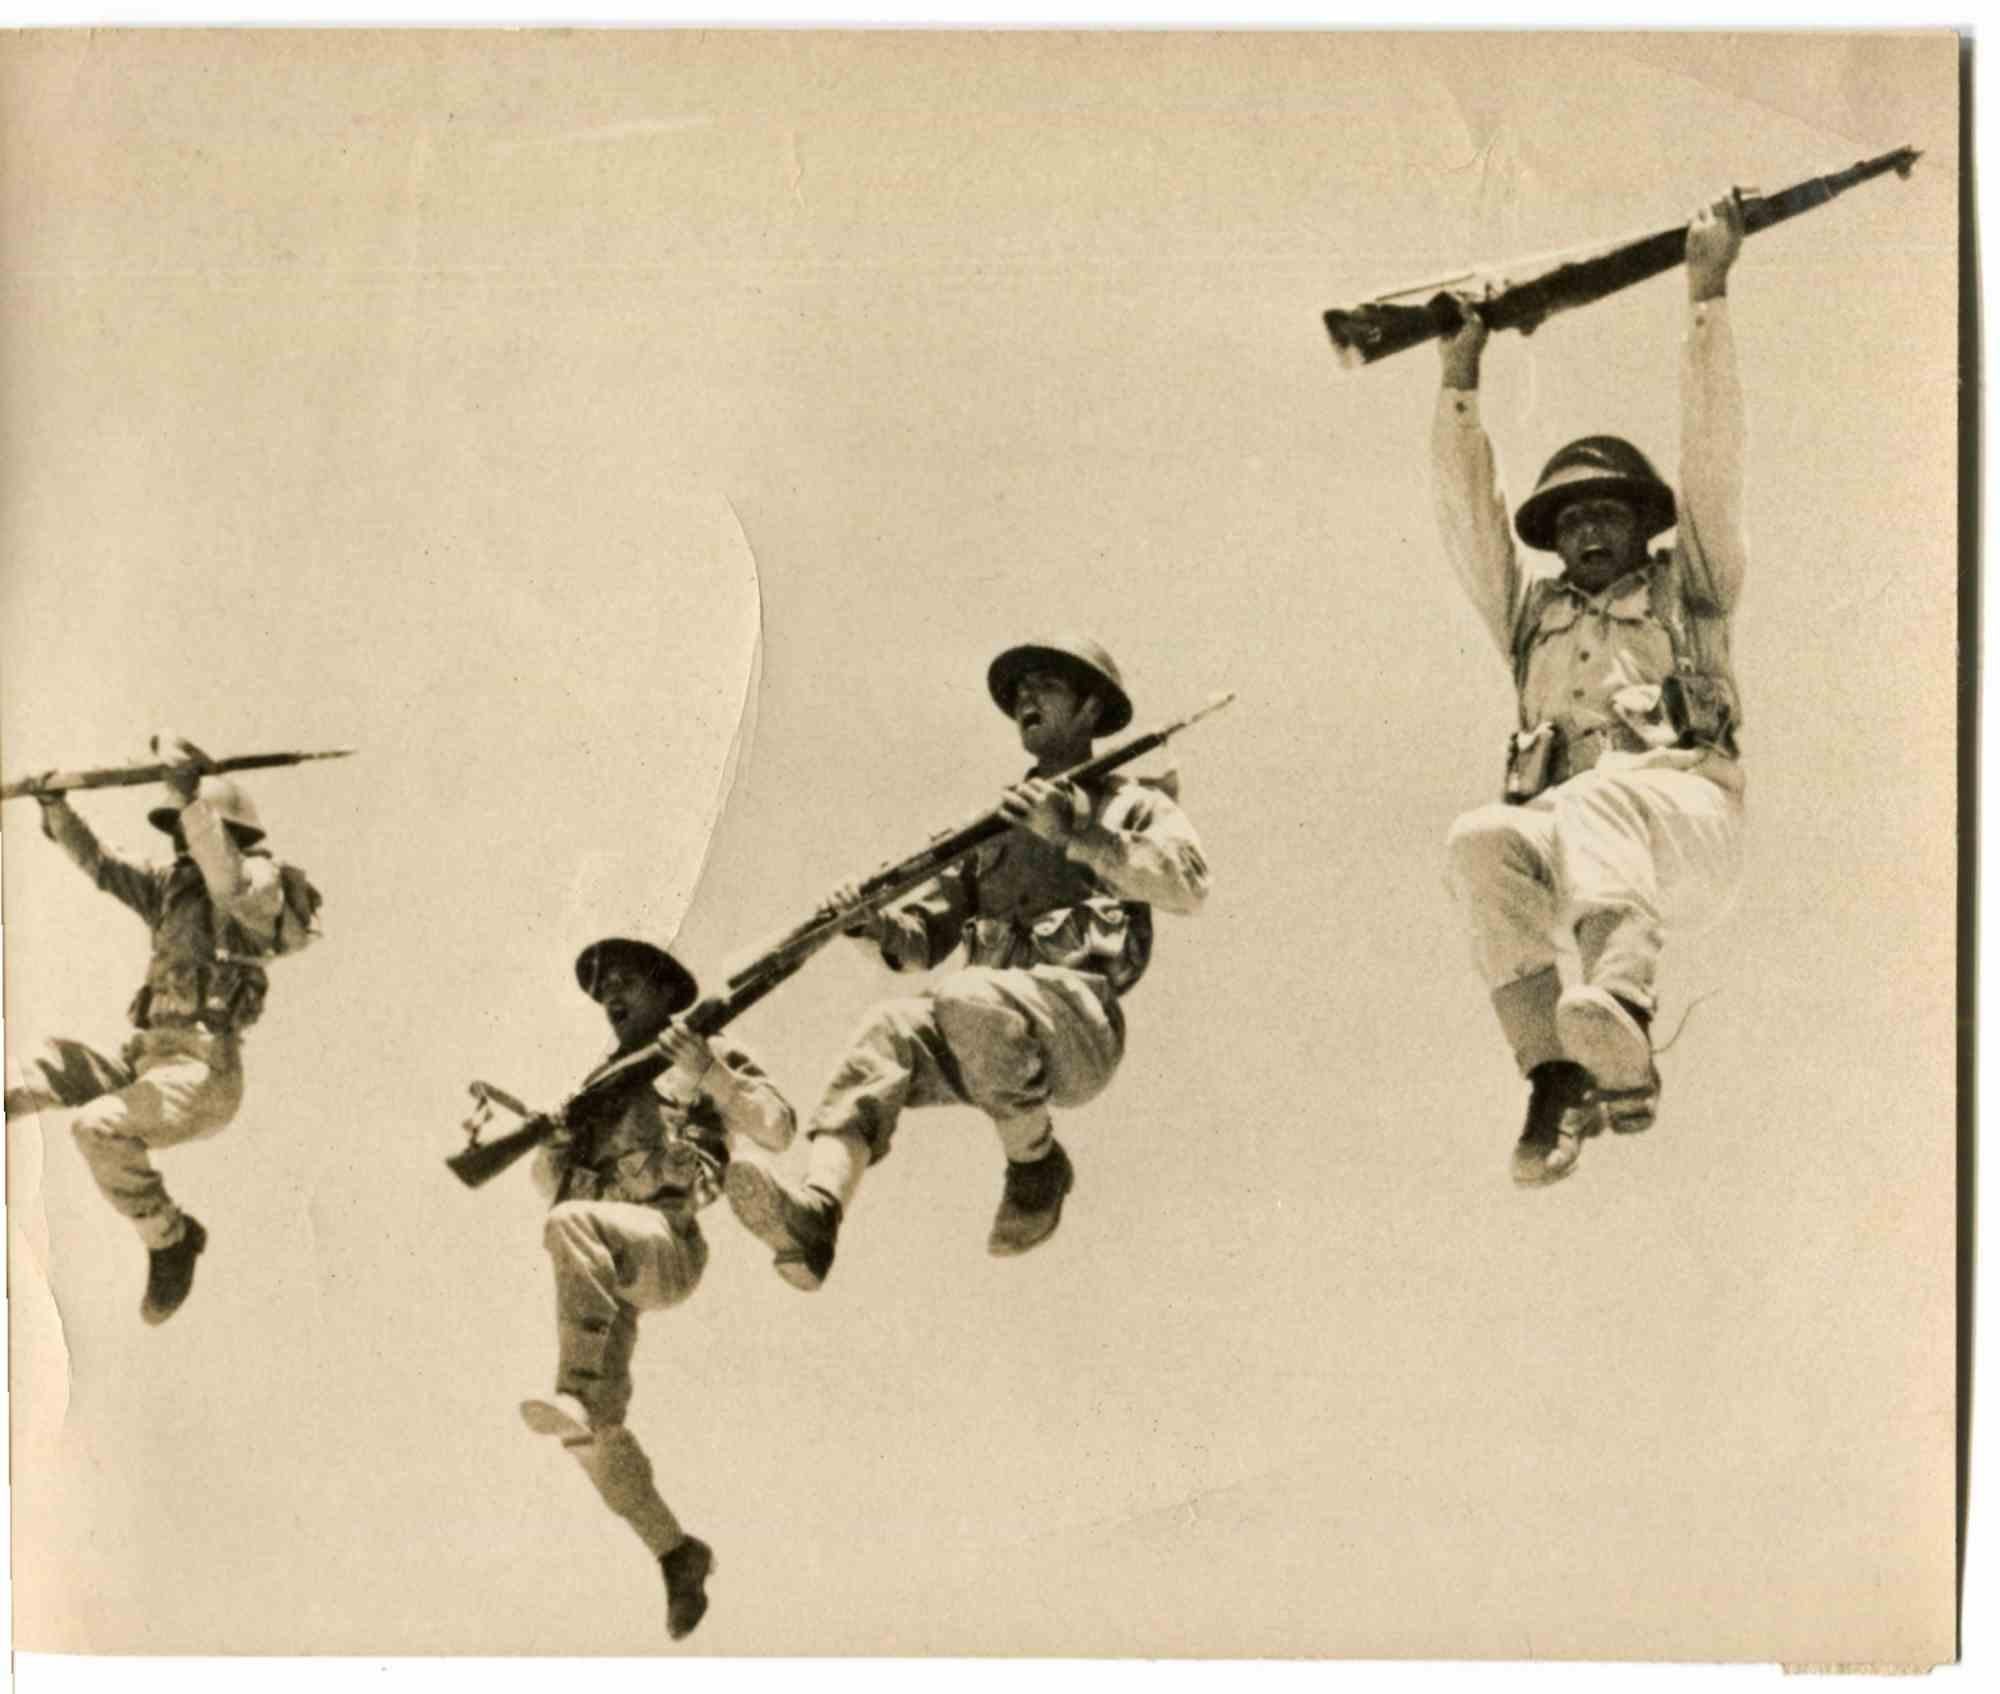 Jumping During Military Training - Mid-20th Century